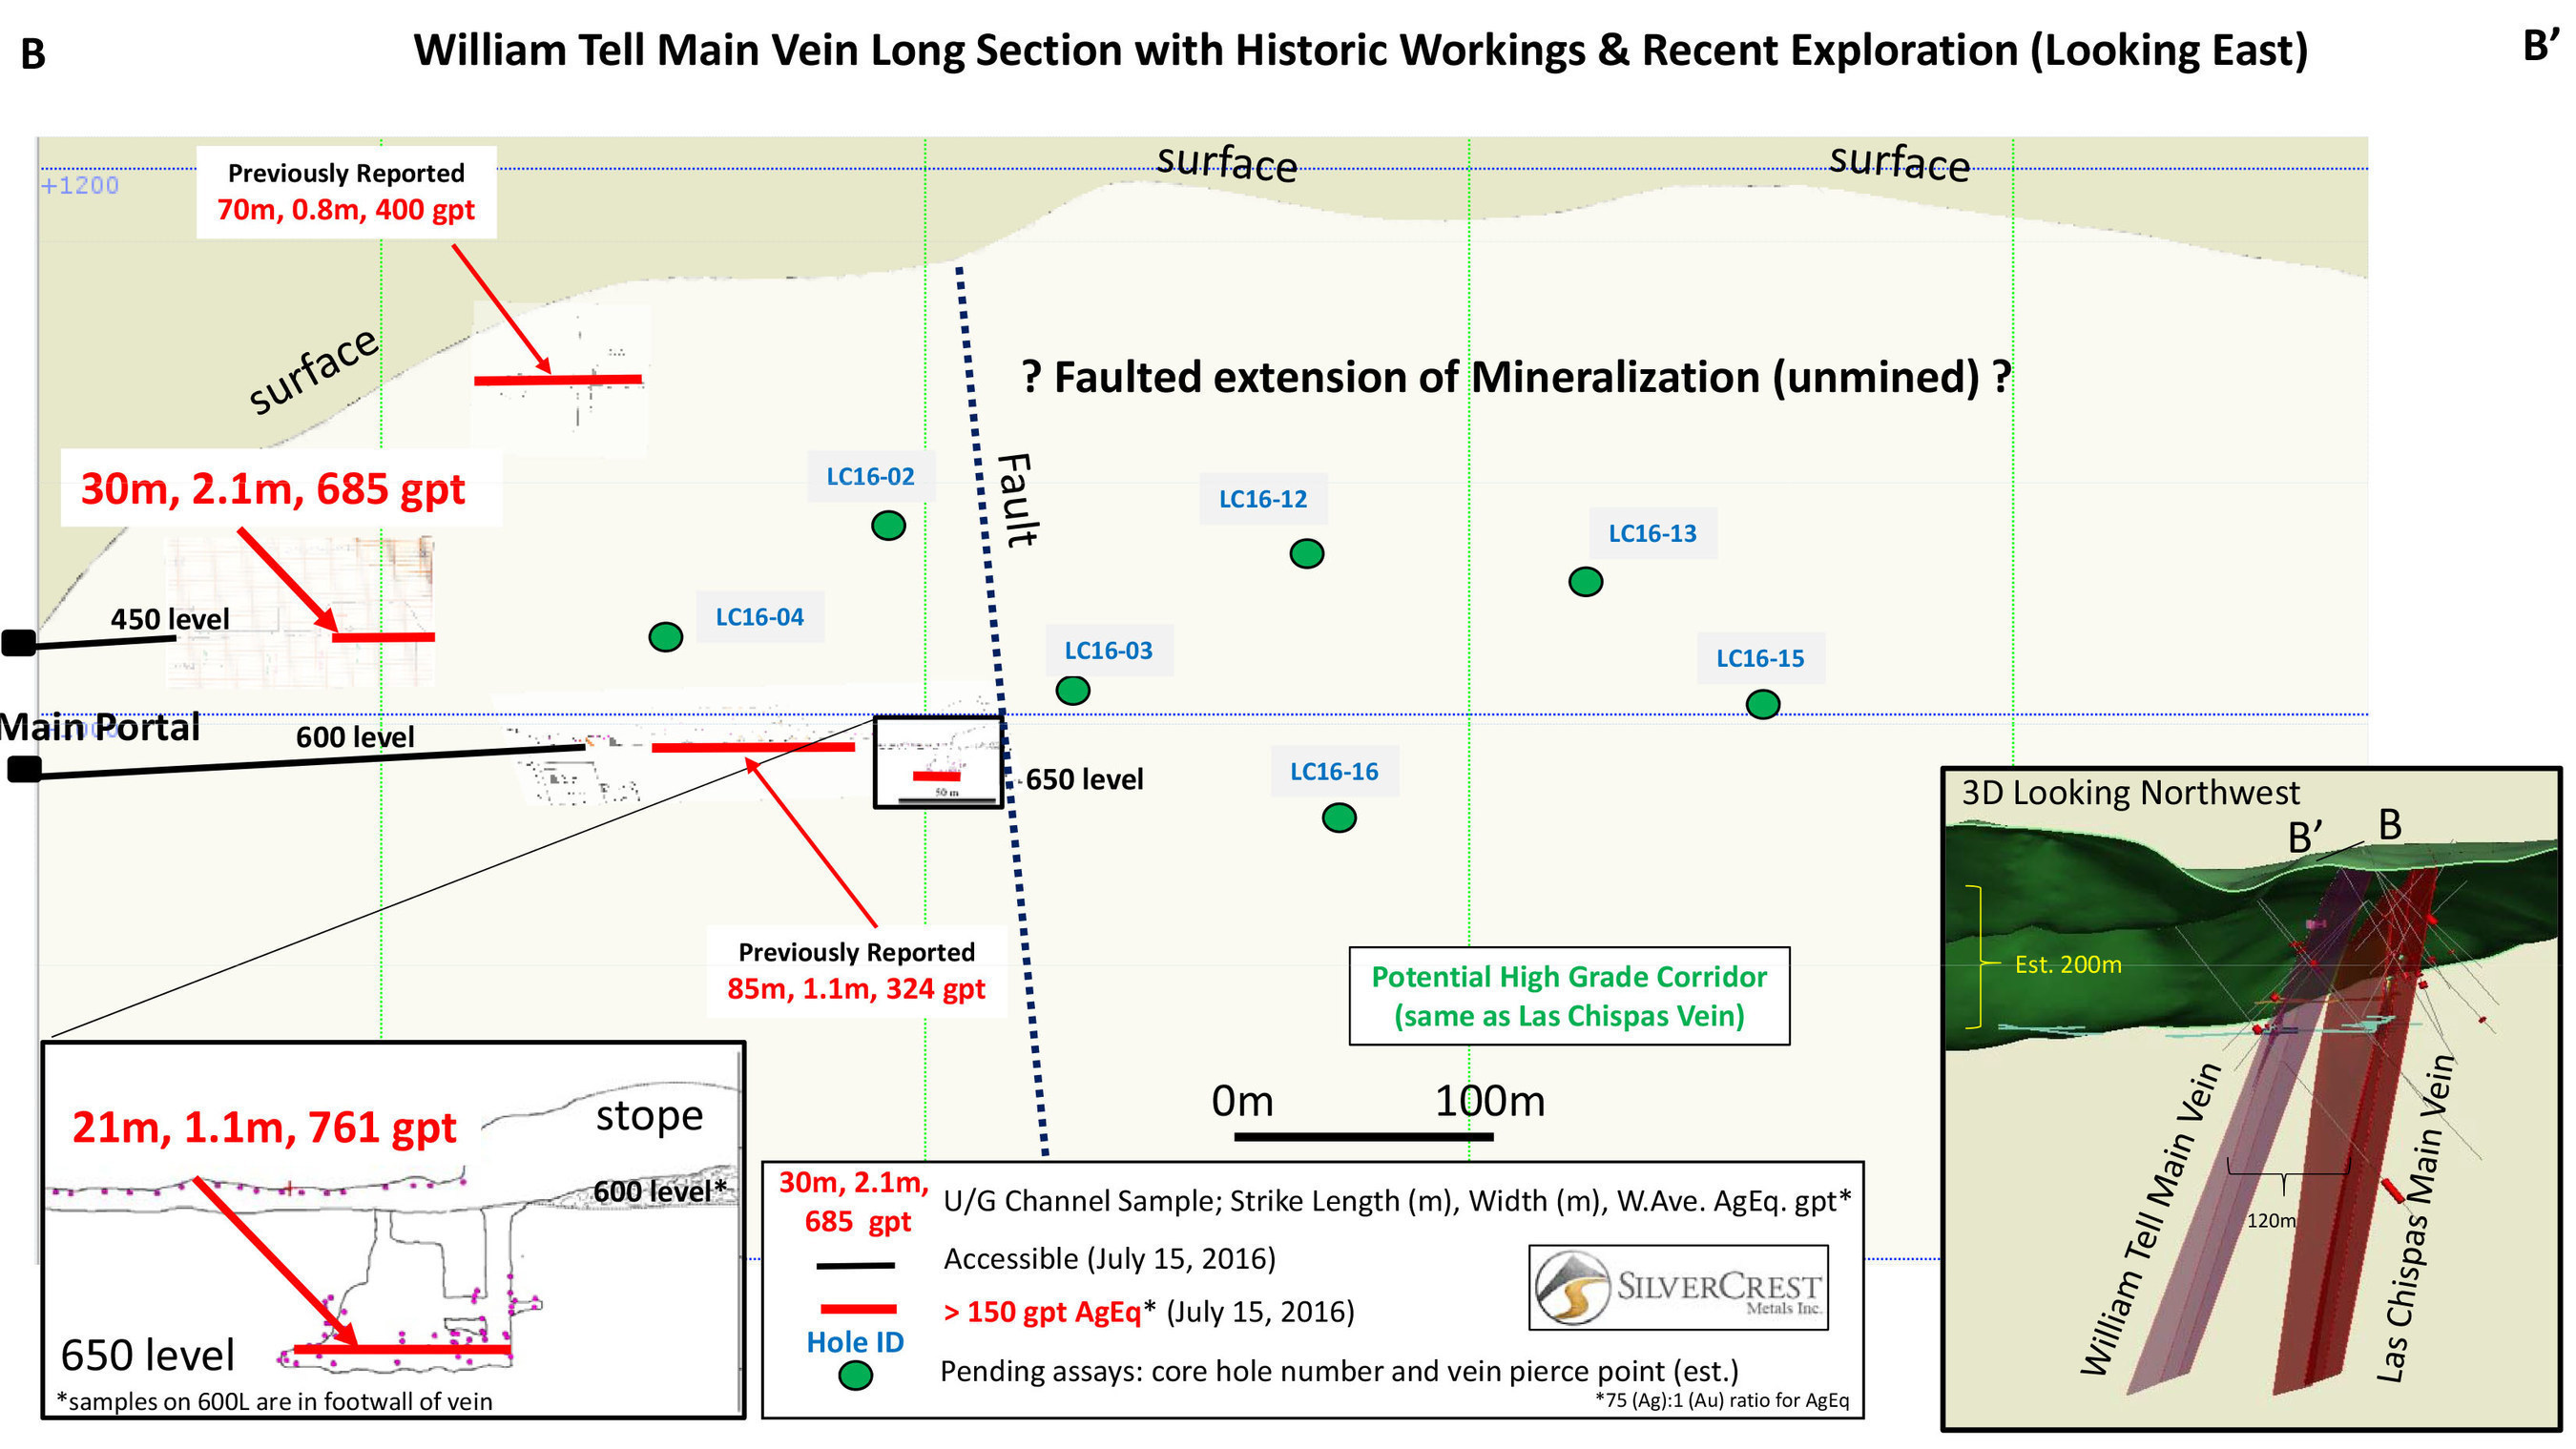 SilverCrest Metals Inc. TSX.V: SIL Las Chispas Project, Sonora, Mexico- William Tell Main Vein Long Section with Historic Workings & Recent Exploration (Looking East)